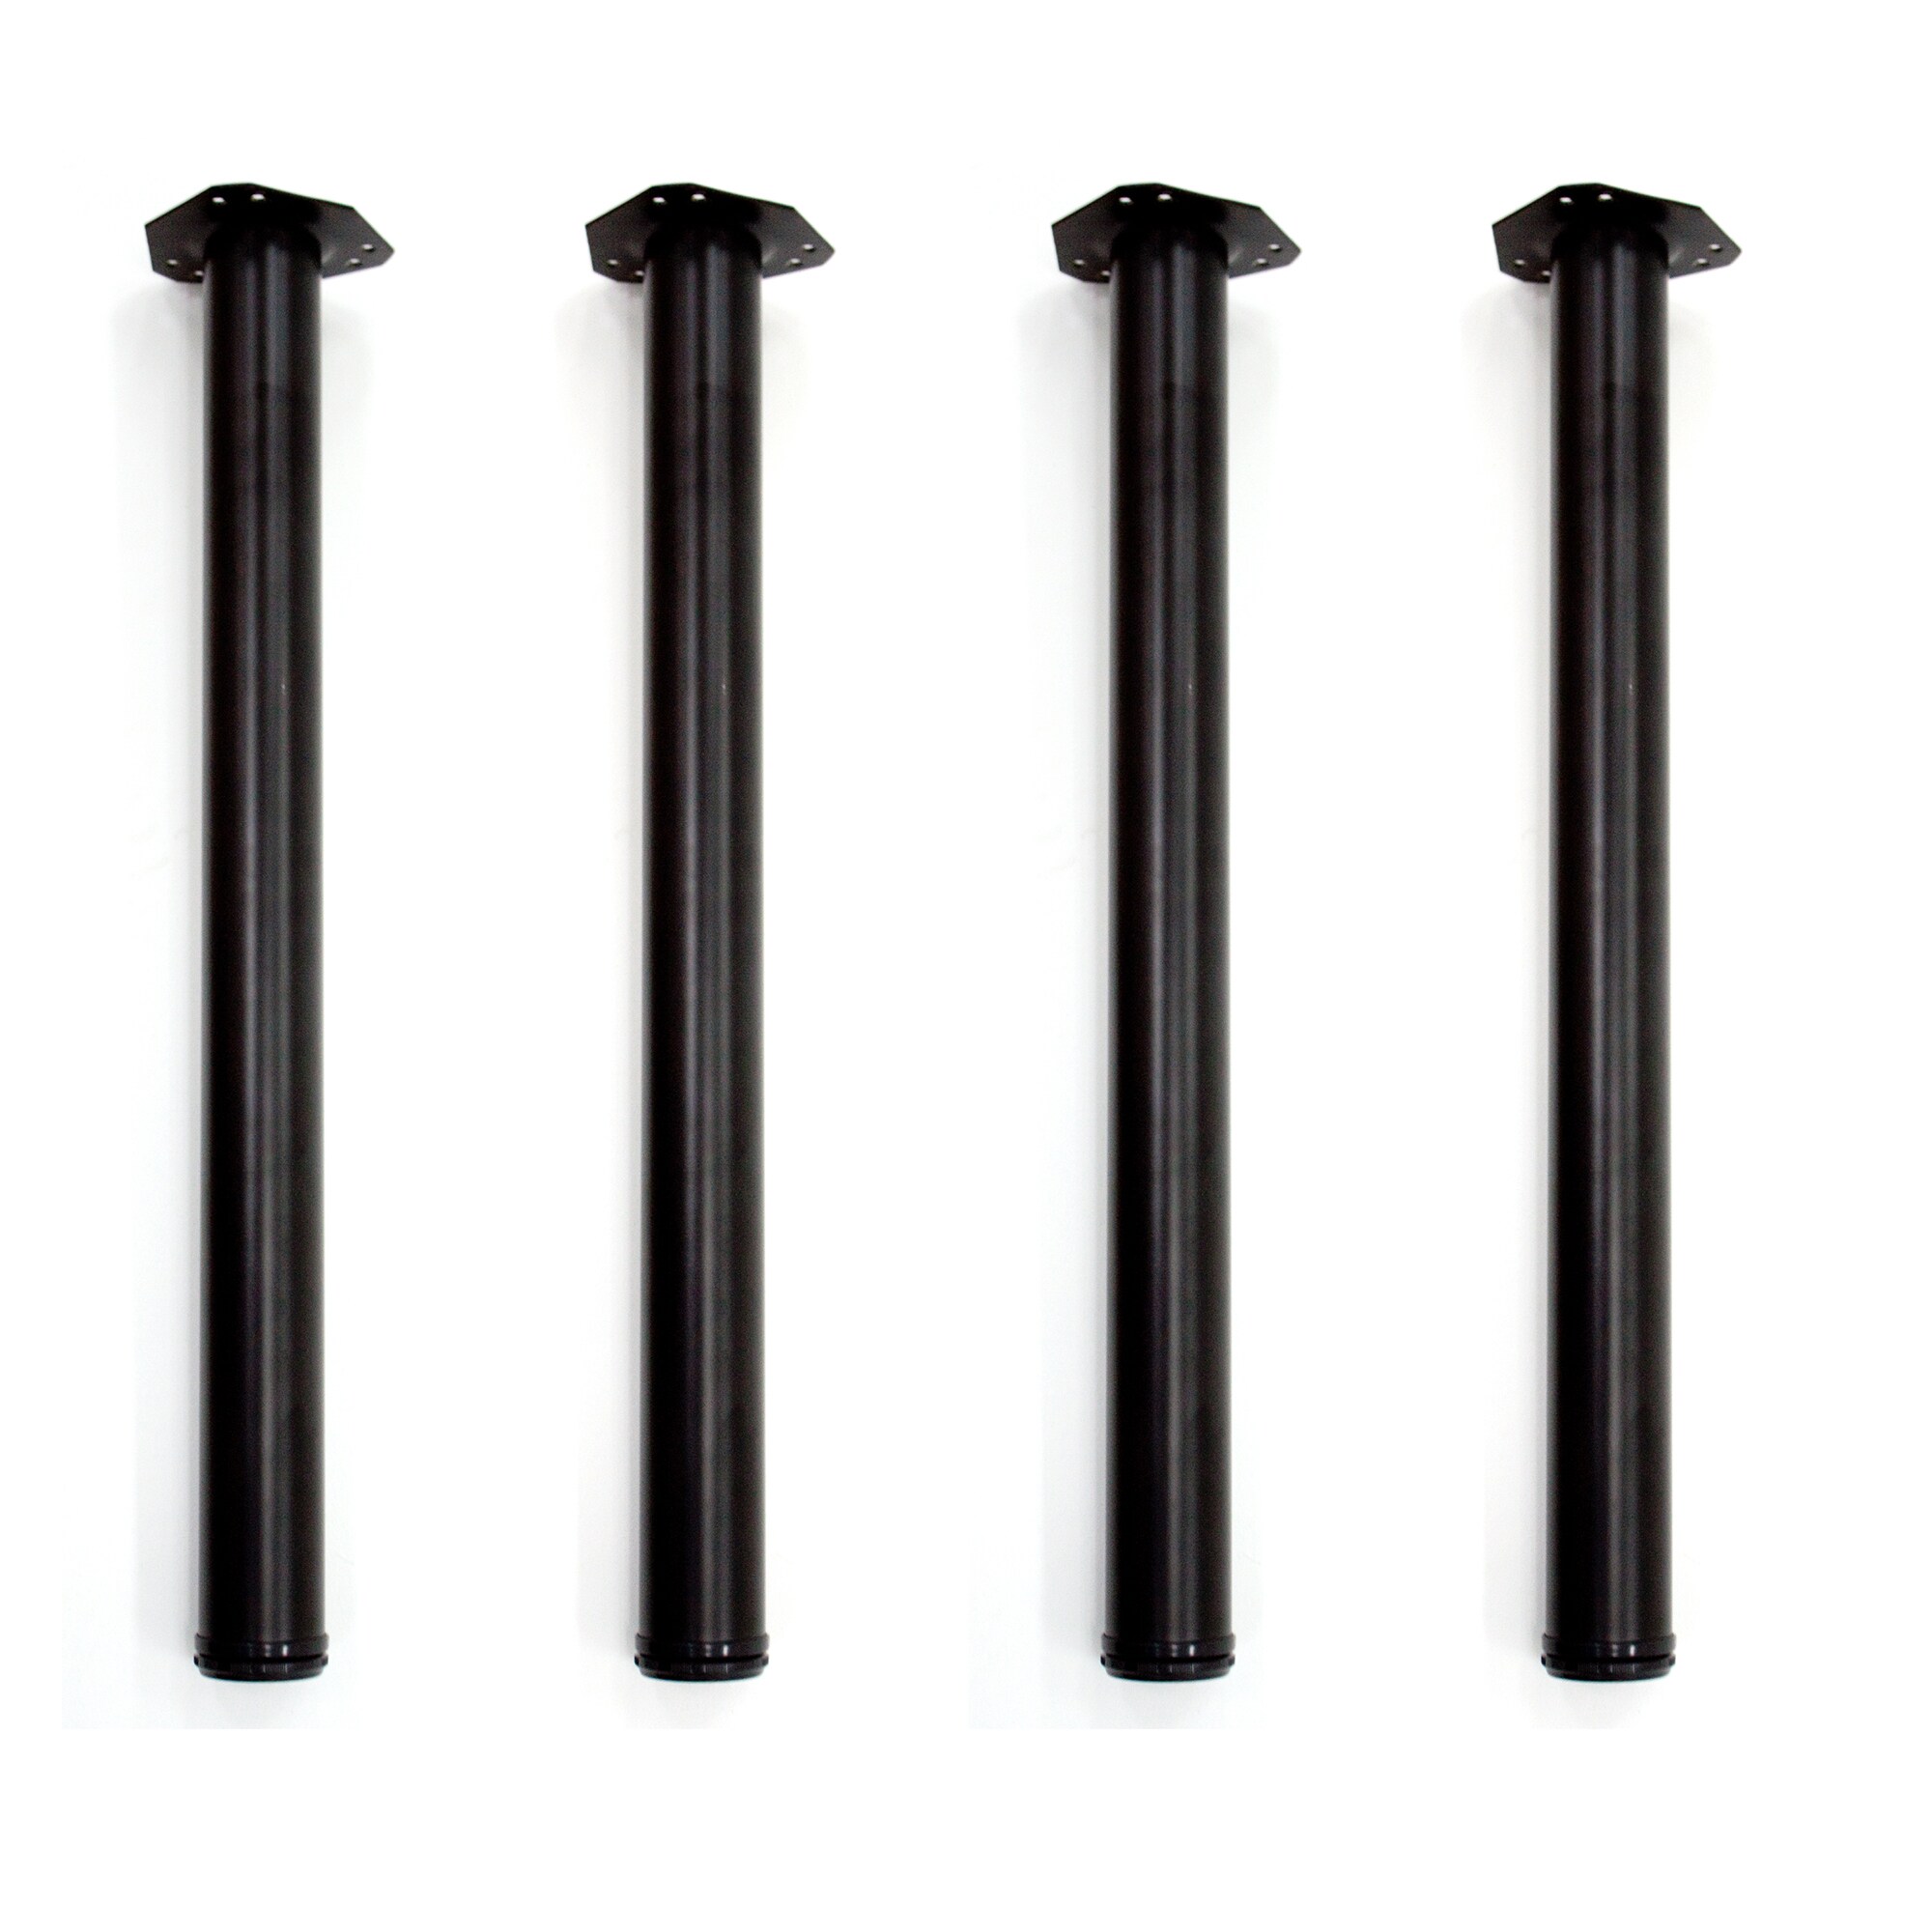 4 X10°Angled Legs Fixing Mounting Plate Bracket Furniture Table Feet Fitting Set 